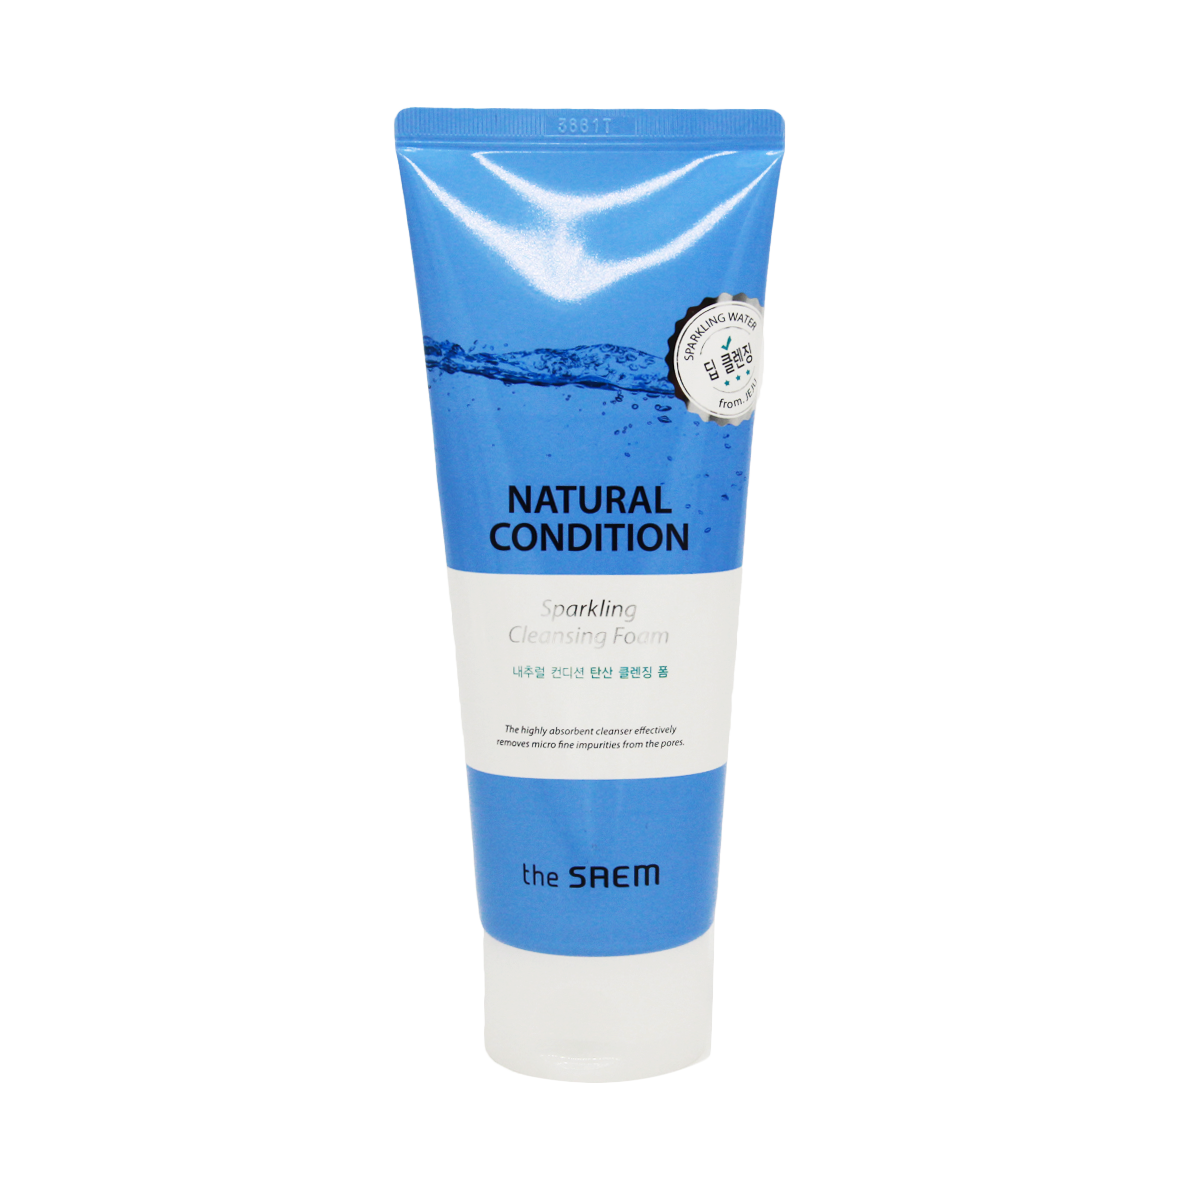 Natural condition. См natural condition пенка для умывания natural condition Cleansing Foam creamy Whip 150мл. Пенка для умывания natural condition Cleansing Foam [Deep clean]. Пенка для умывания the Saem Scrub Foam. !Пенка natural condition Cleansing THESEAM, 150 мл.